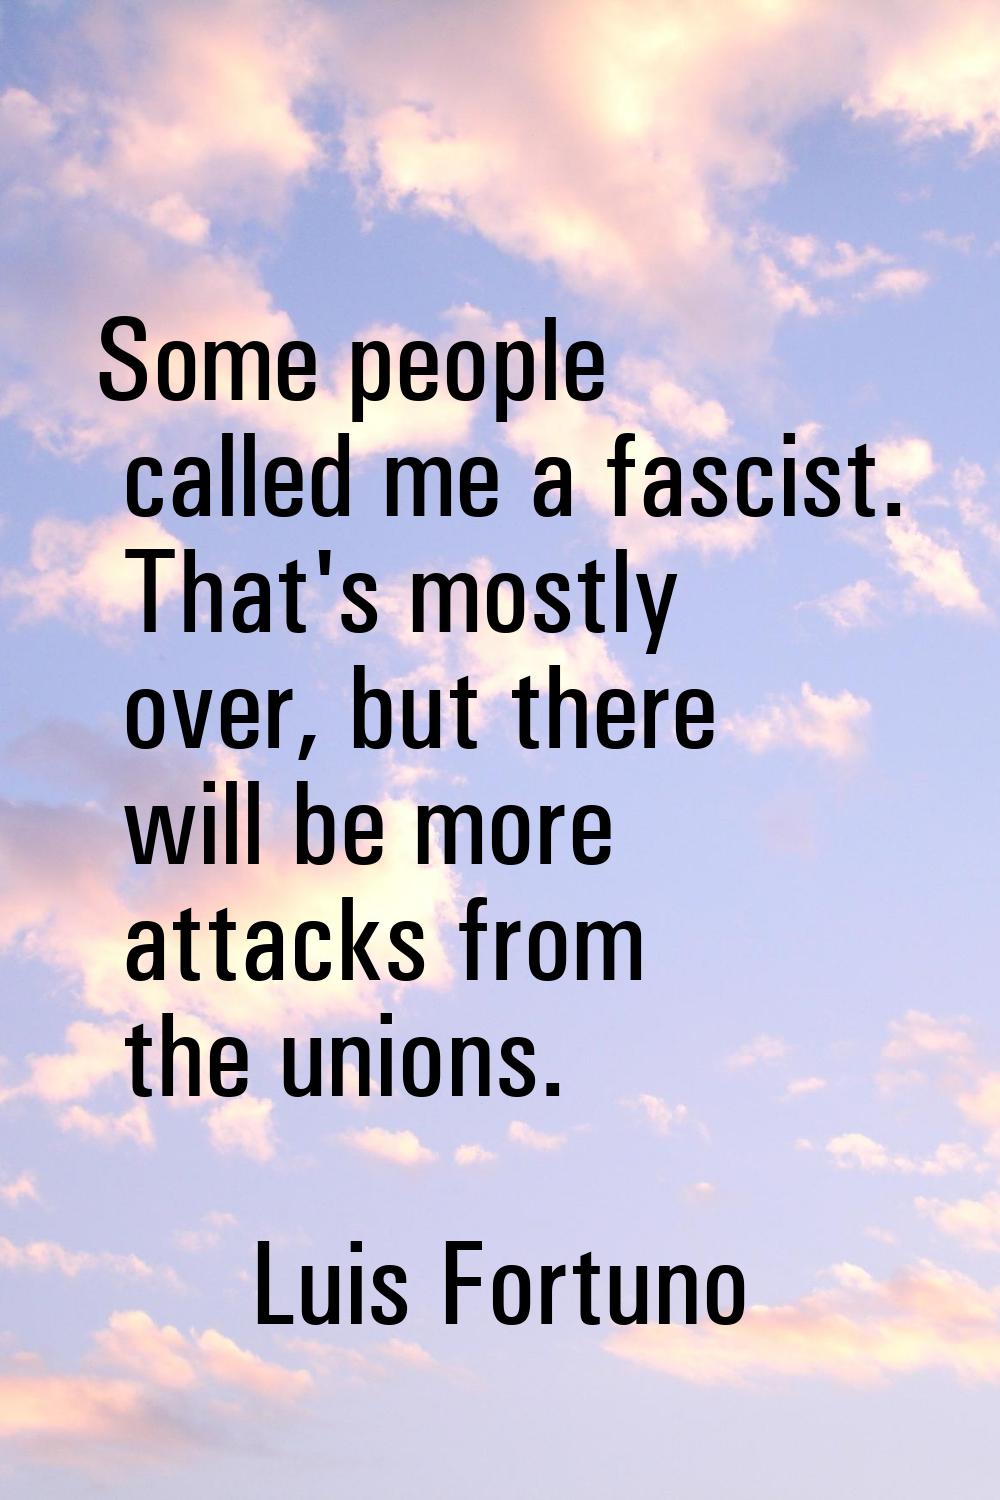 Some people called me a fascist. That's mostly over, but there will be more attacks from the unions